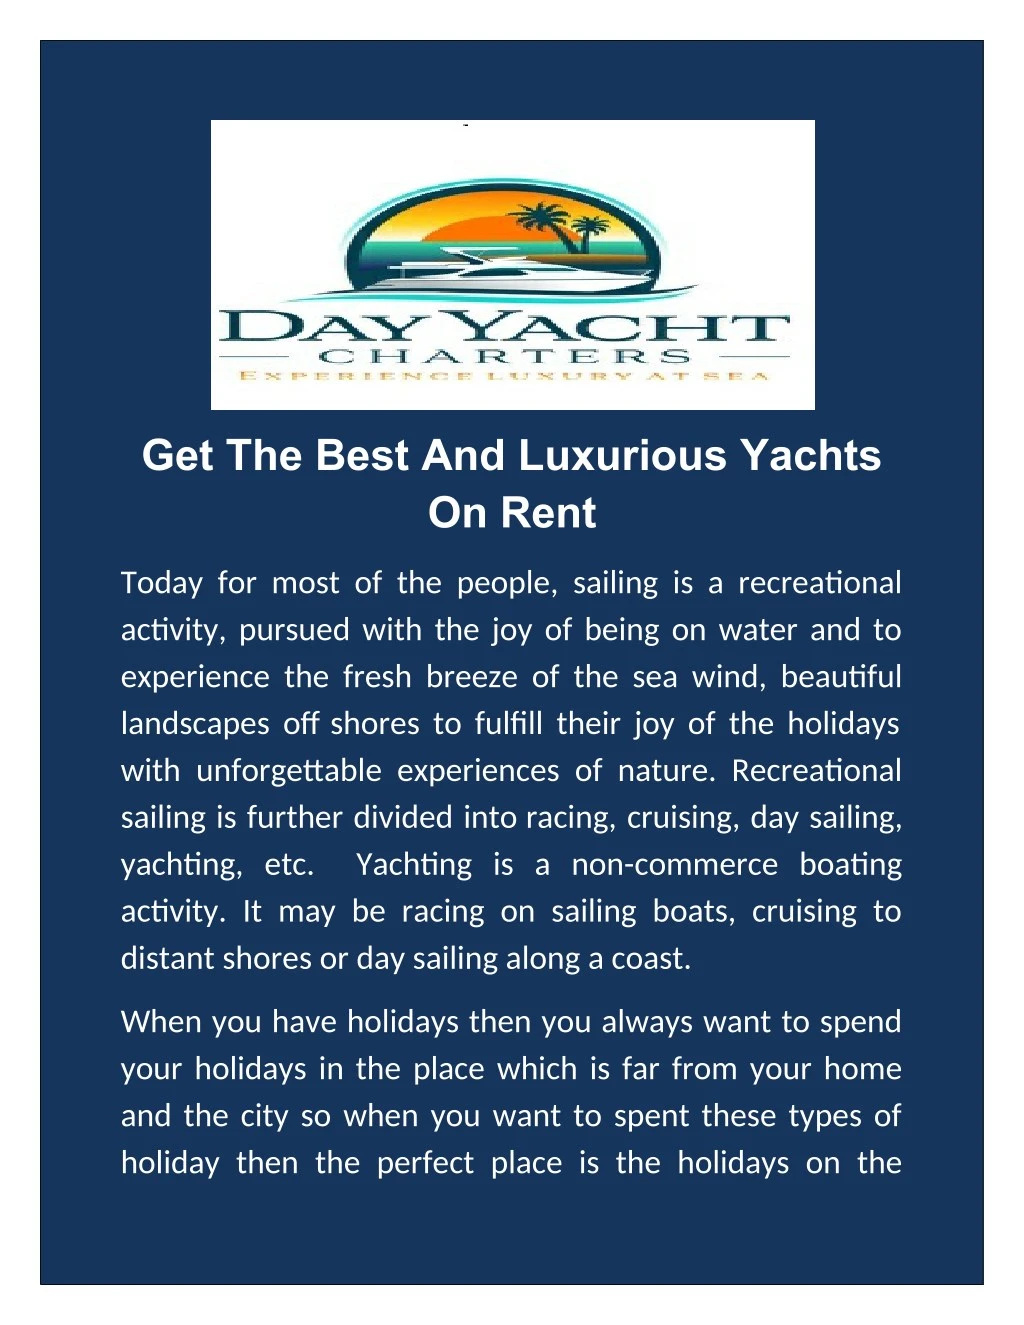 get the best and luxurious yachts on rent